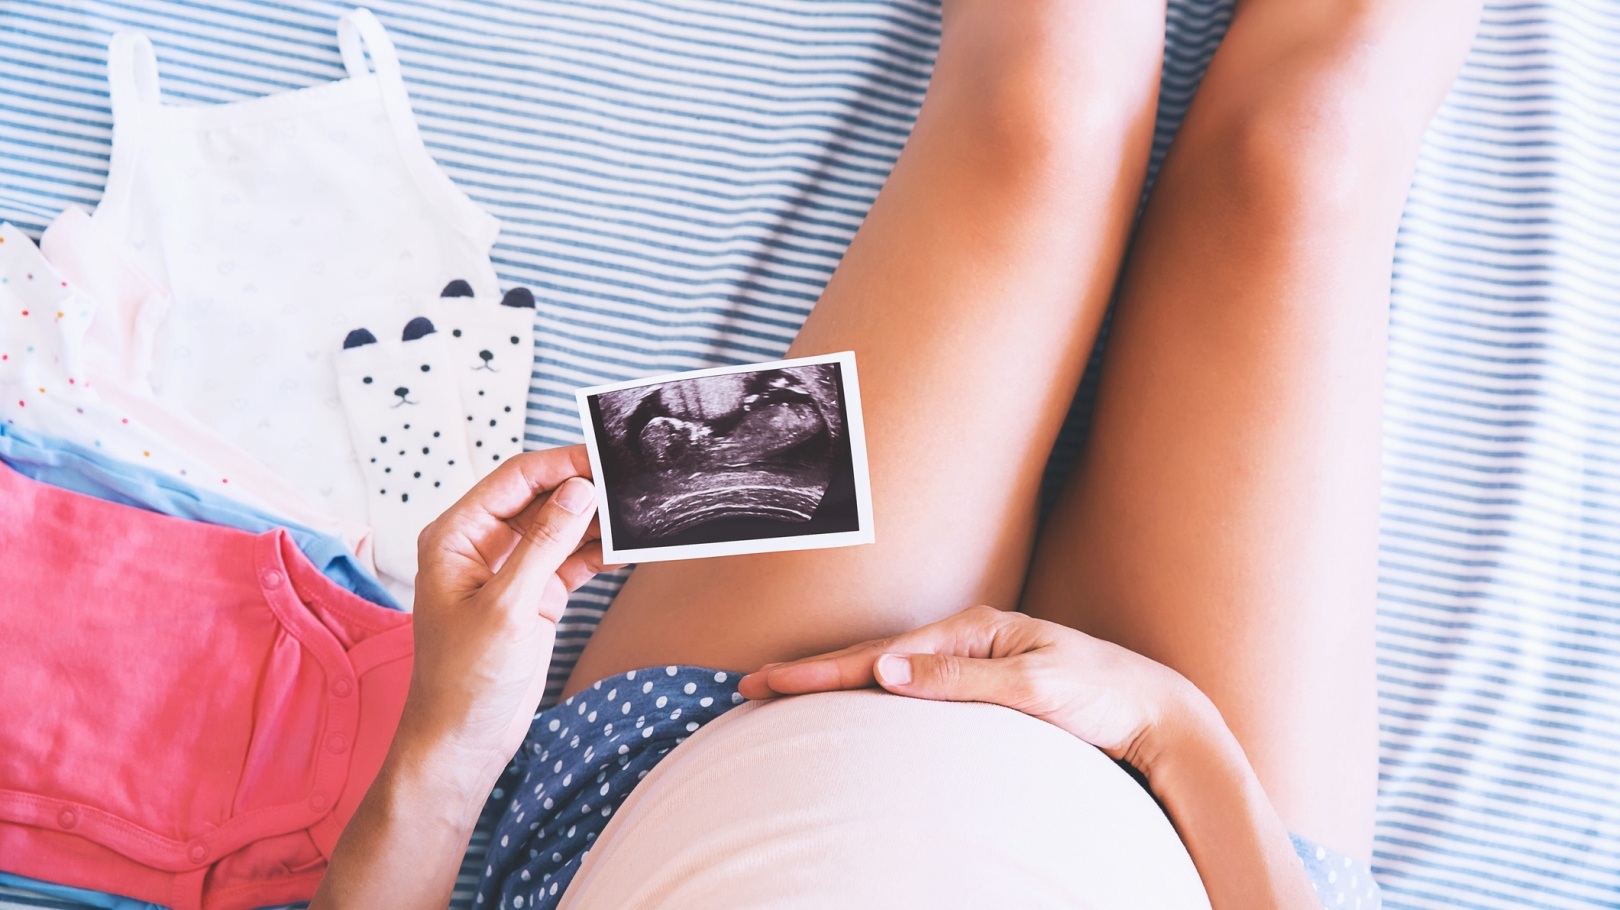 What are the changes you'll experience to your body during pregnancy and what kind of medical tests are you expected to take? Check out this all-in-one pregnancy guide